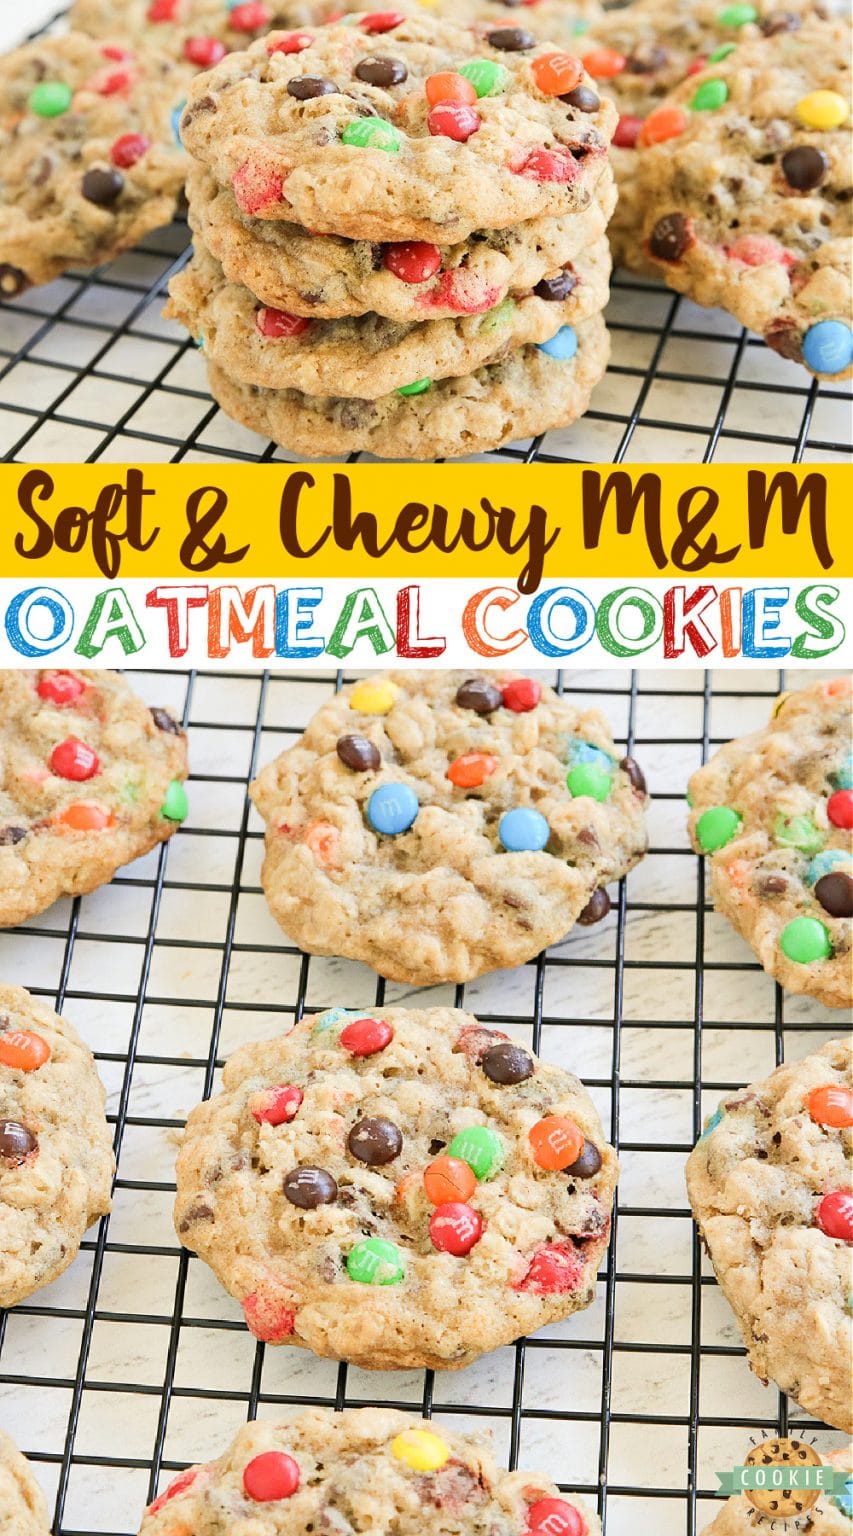 M&M OATMEAL COOKIES - Family Cookie Recipes